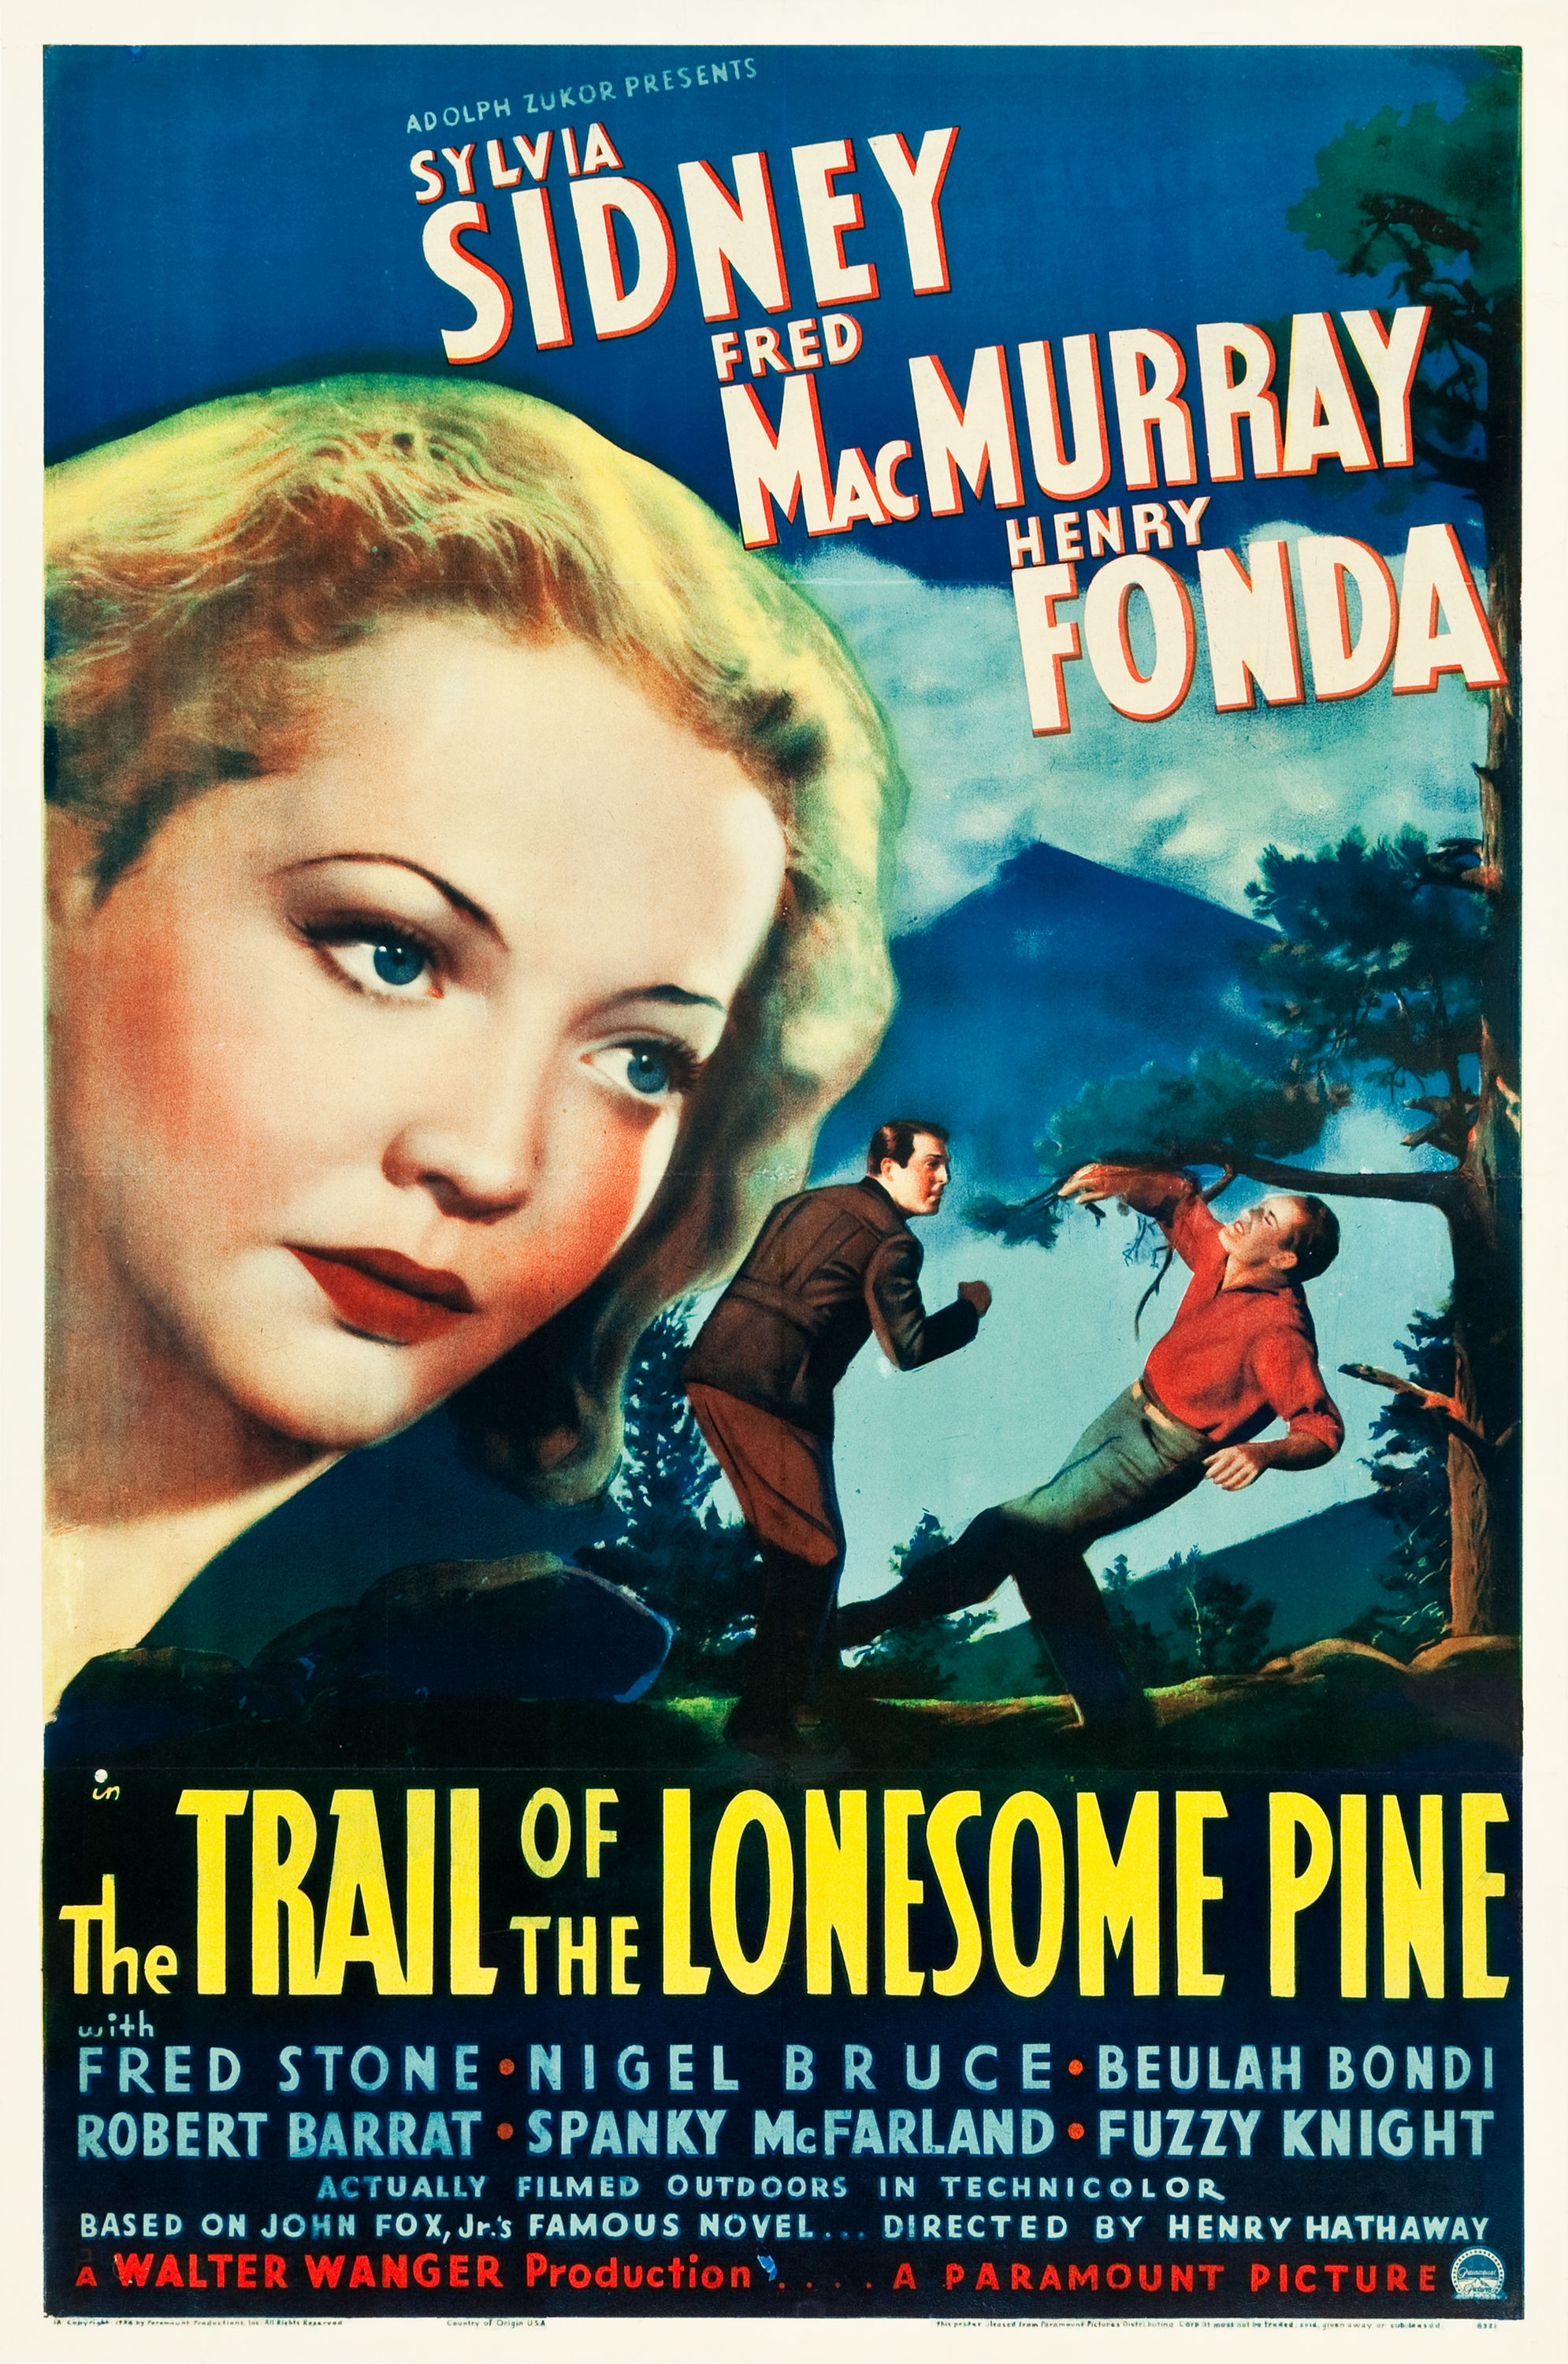 the trail of the lonesome pine 1936